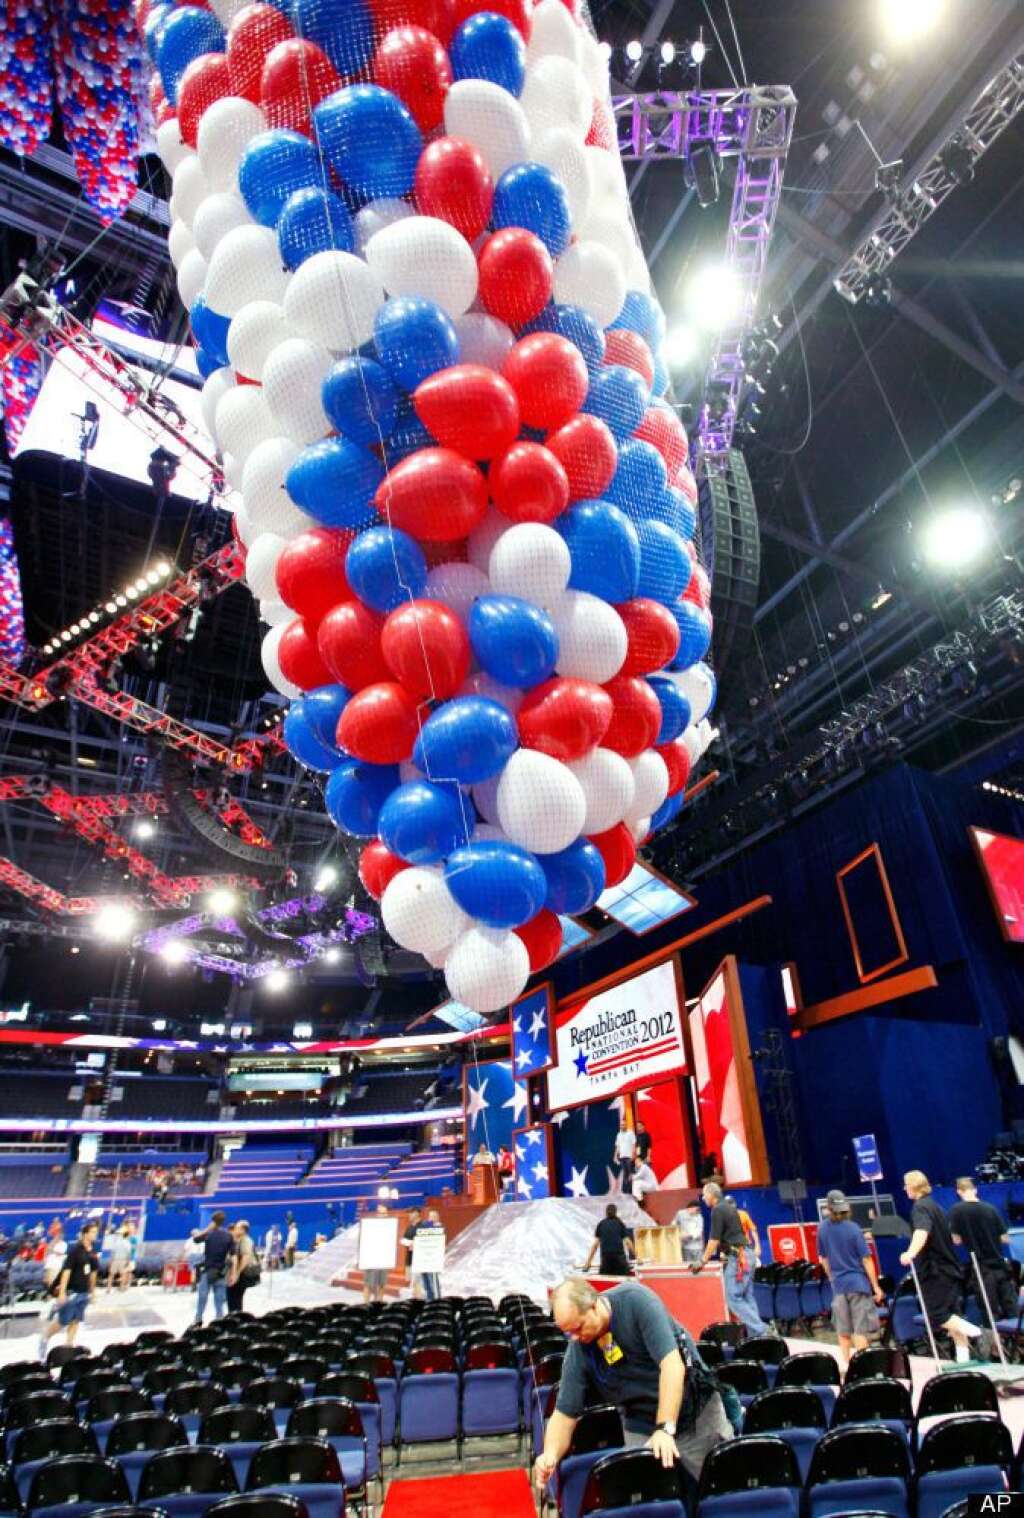 Riggers load nets full of balloons for the Republican National Convention festivities inside the Tampa Bay Times Forum, Friday, Aug. 24, 2012, in Tampa, Fla. (AP Photo/J. Scott Applewhite)